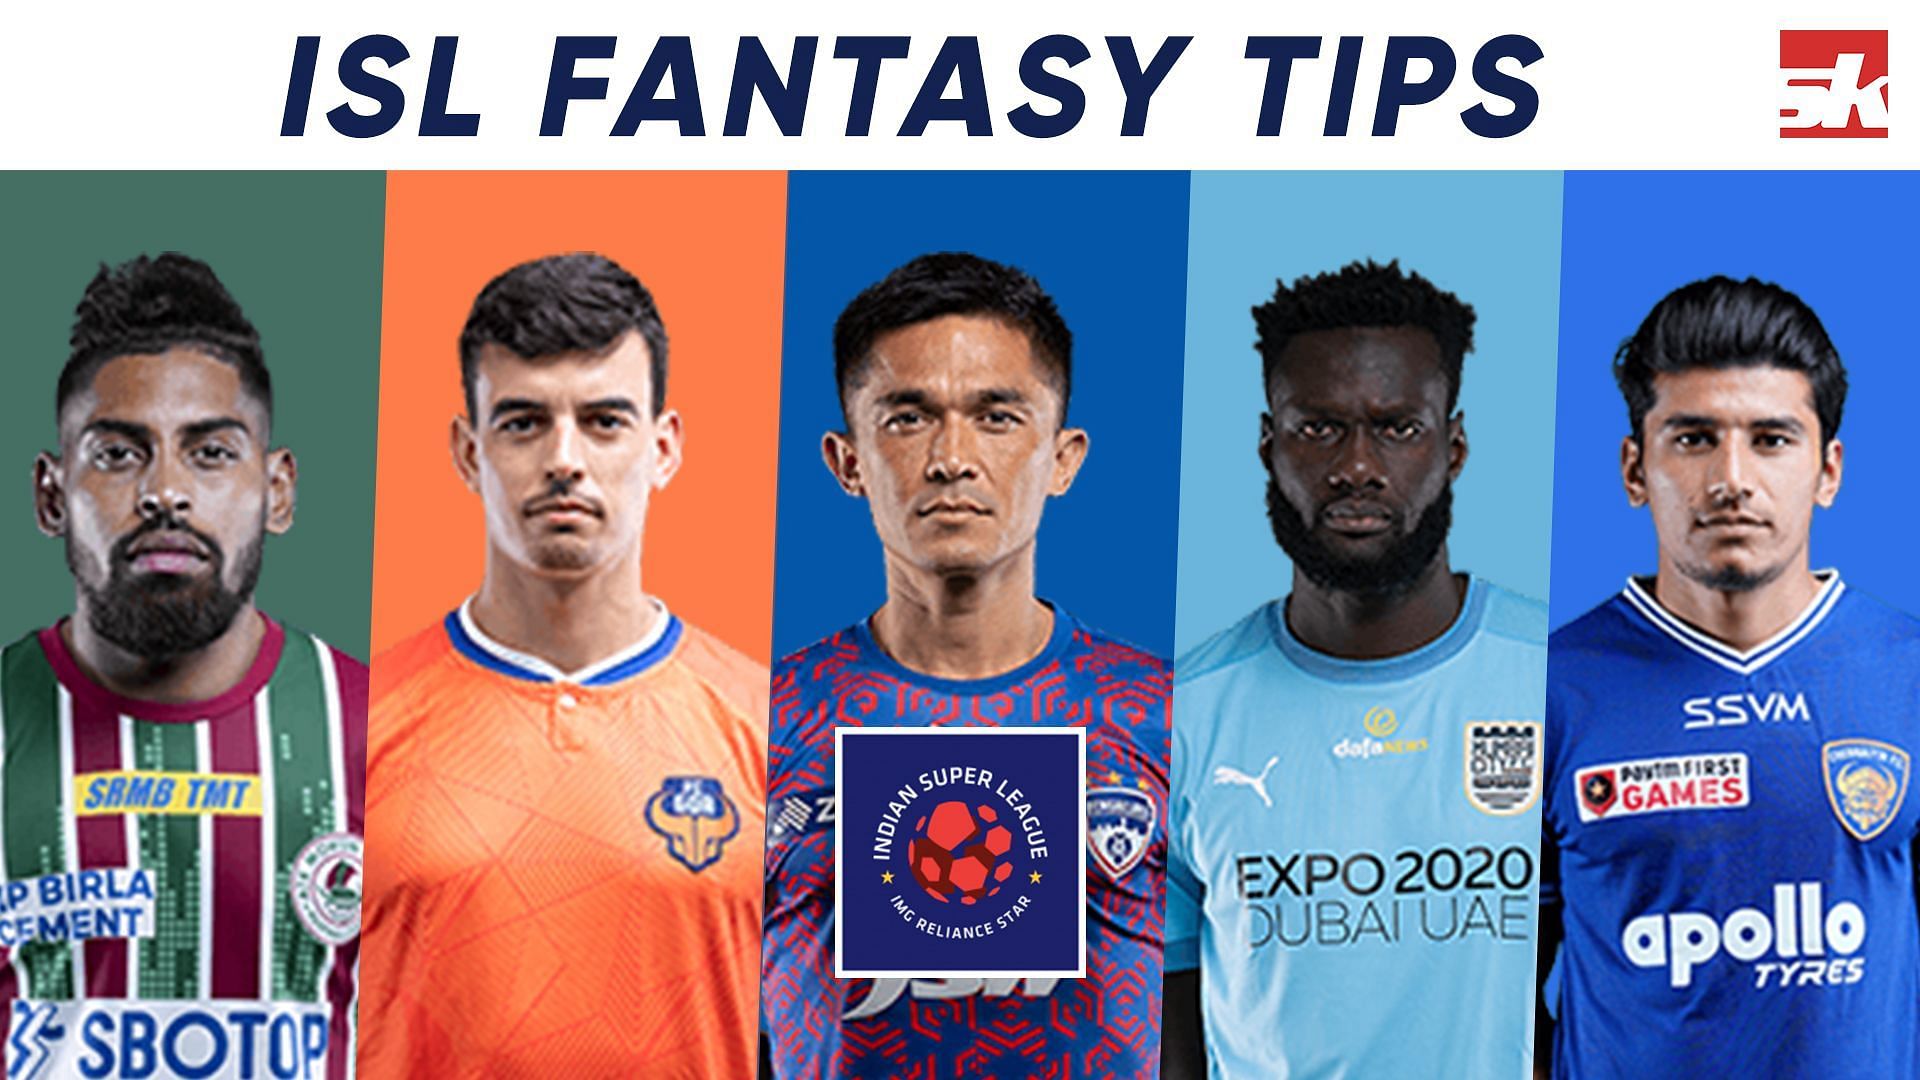 NorthEast United vs SC East Bengal Dream11 Prediction, Fantasy Football Tips &amp; Playing 11 Updates for Today&#039;s ISL match - December 17th, 2021